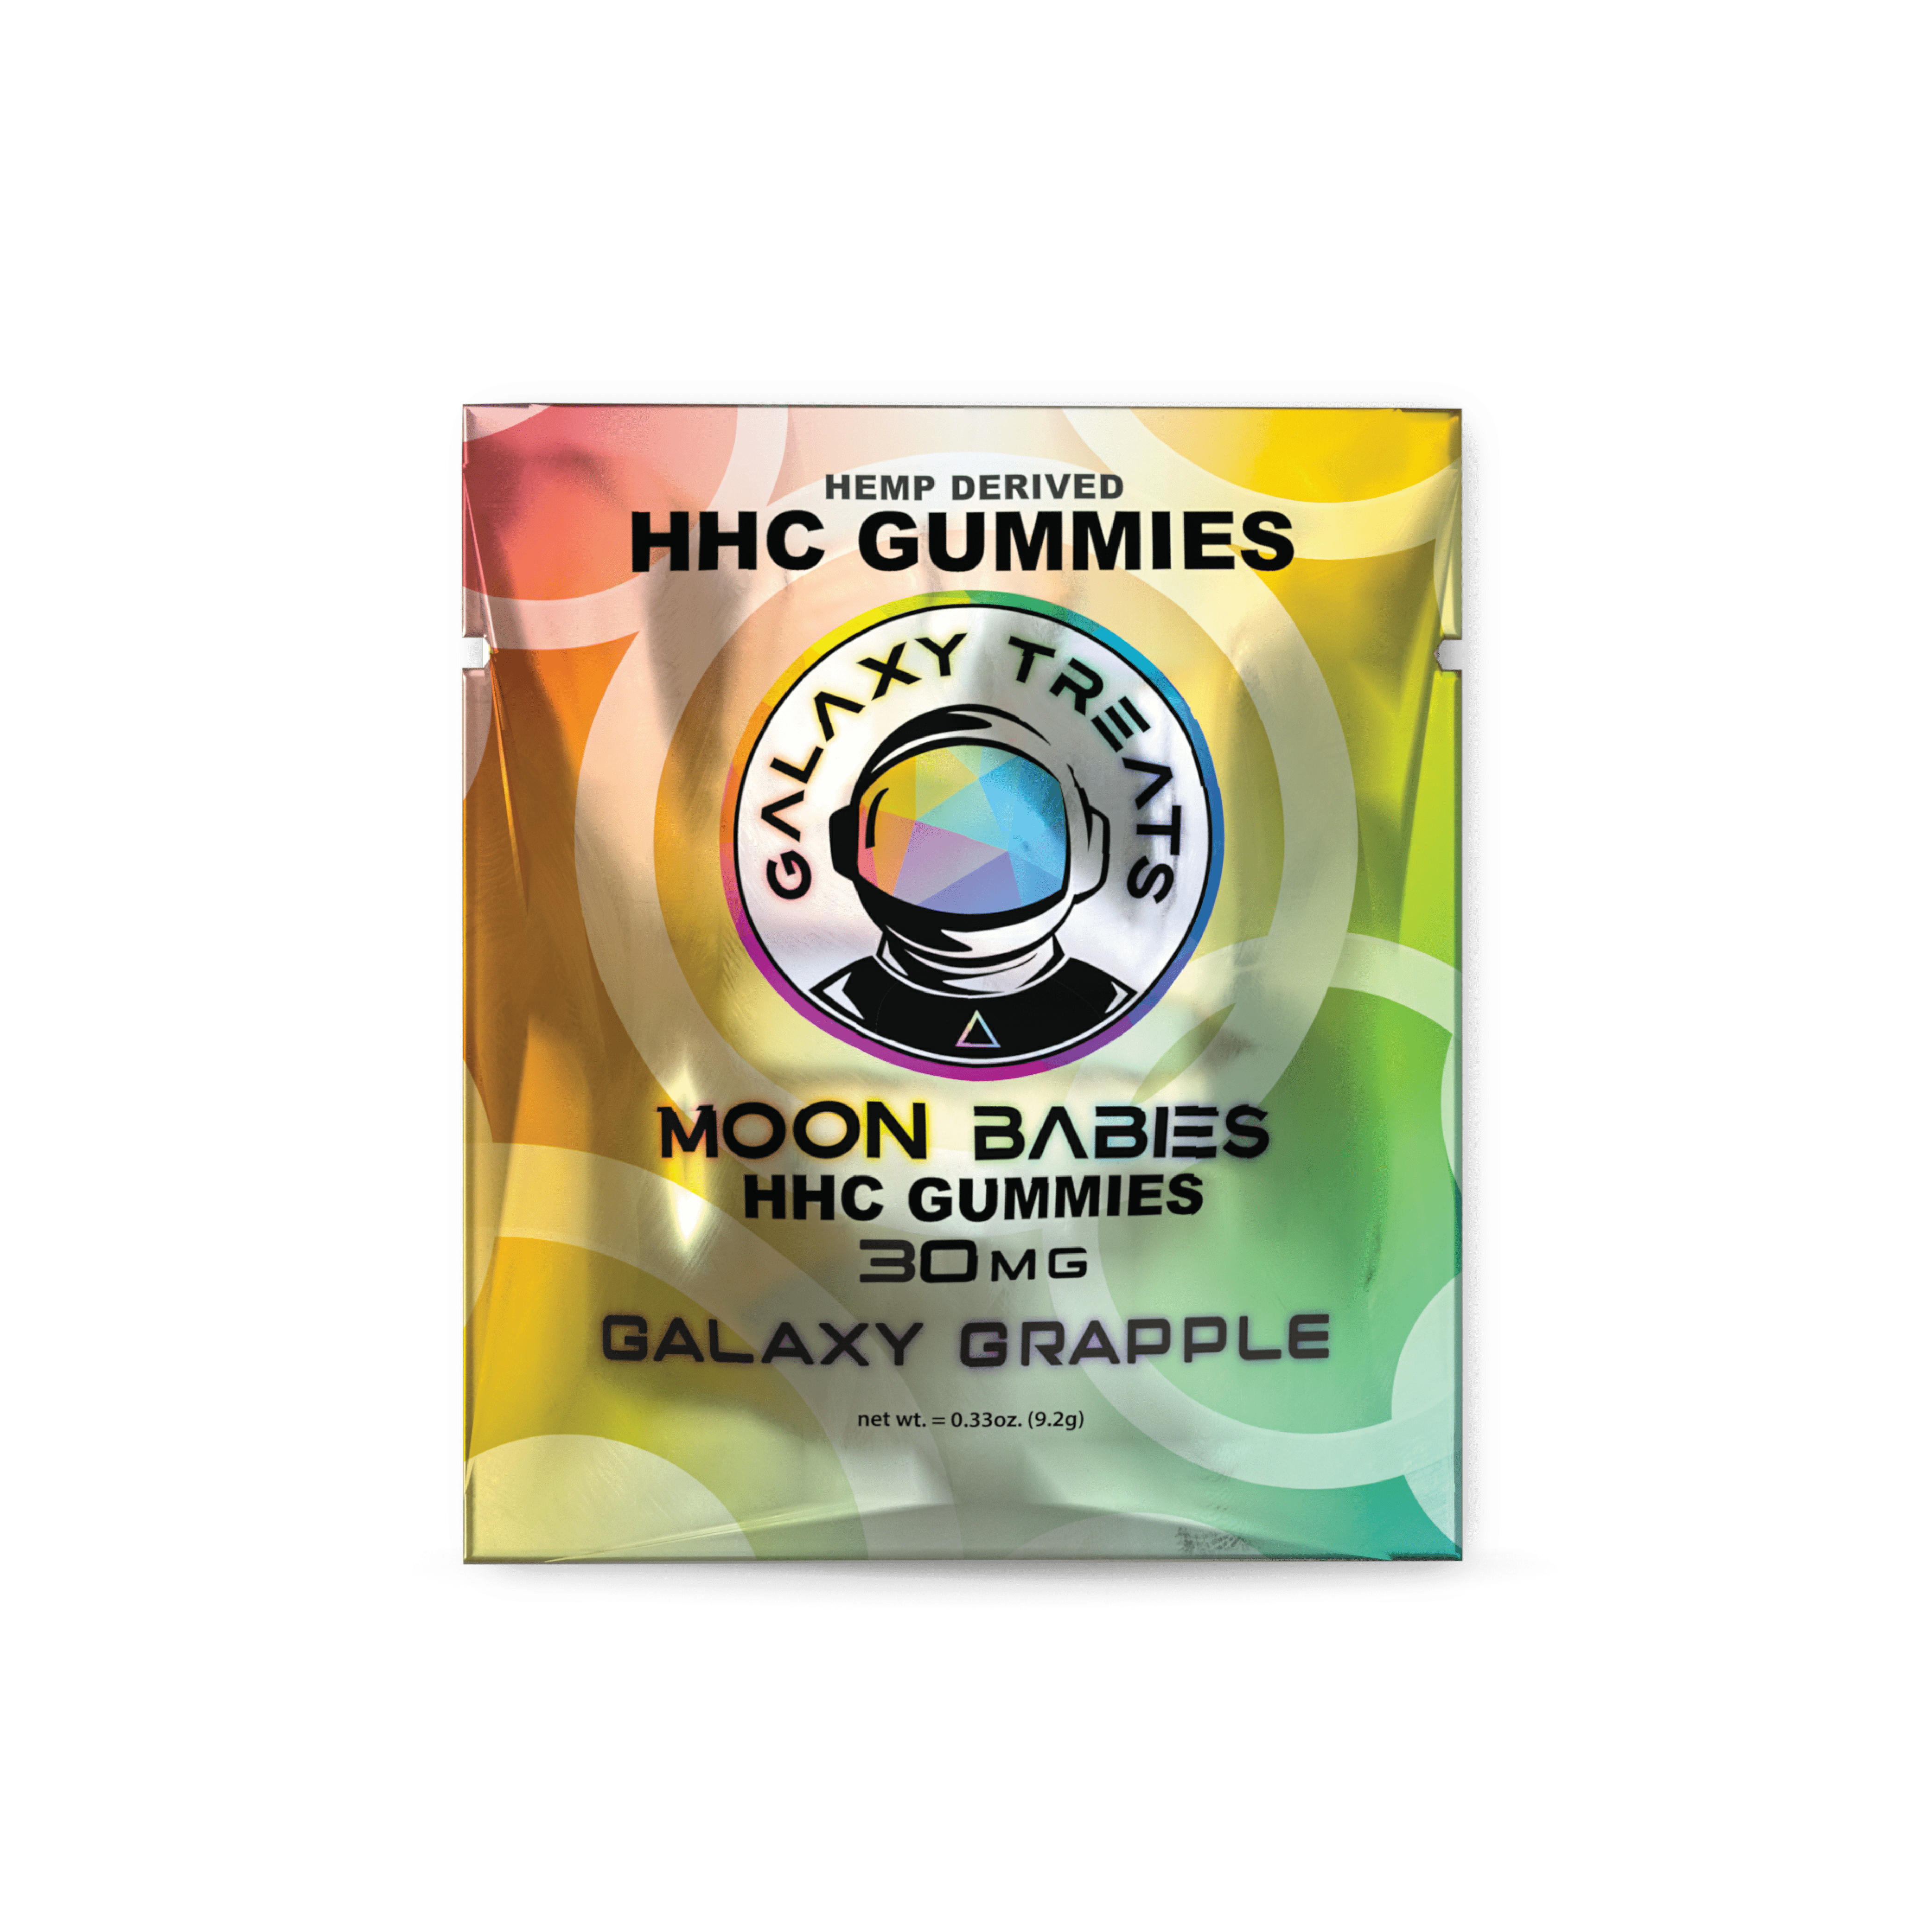 In-Depth Review The Finest HHC Gummies on the Market By Galaxy Treats